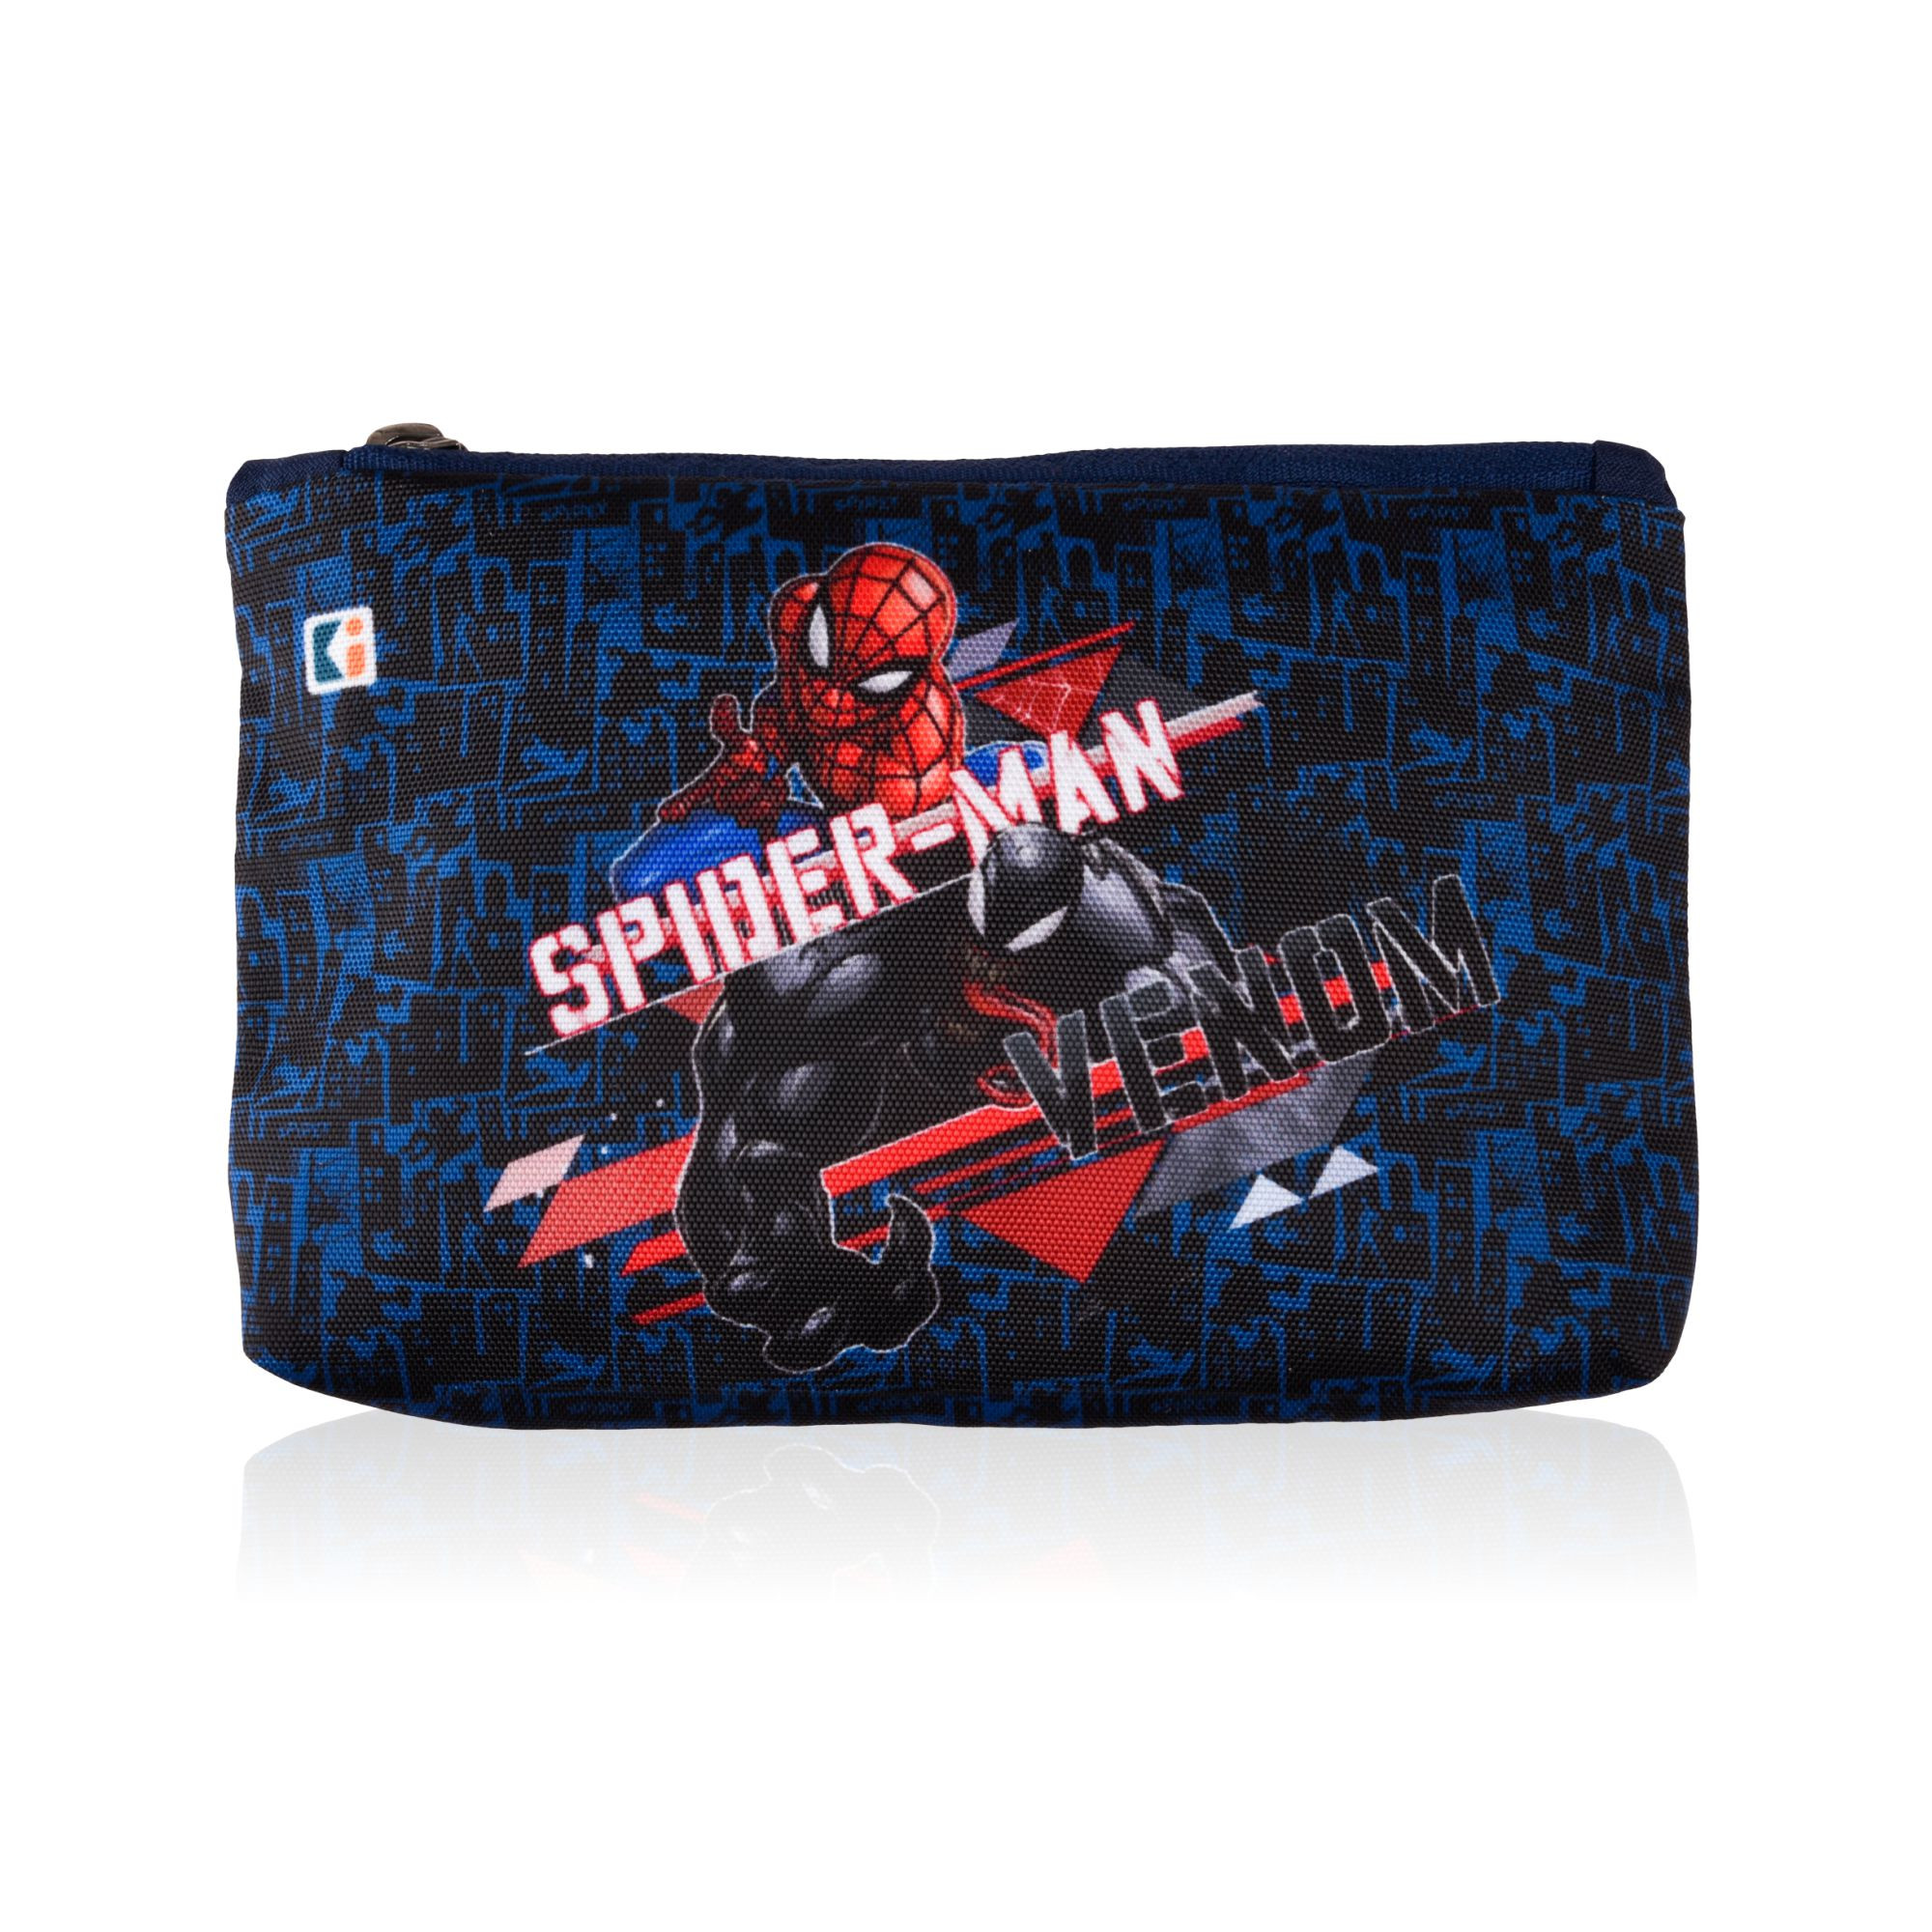 Kuber Industries Pencil Pouch | Square Stationary Pouch | Pen-Pencil Box for Kids | School Geometry Pouch | Pencil Utility Bag | Zipper Pencil Organizer | Marvel Spider-Man | Navy Blue